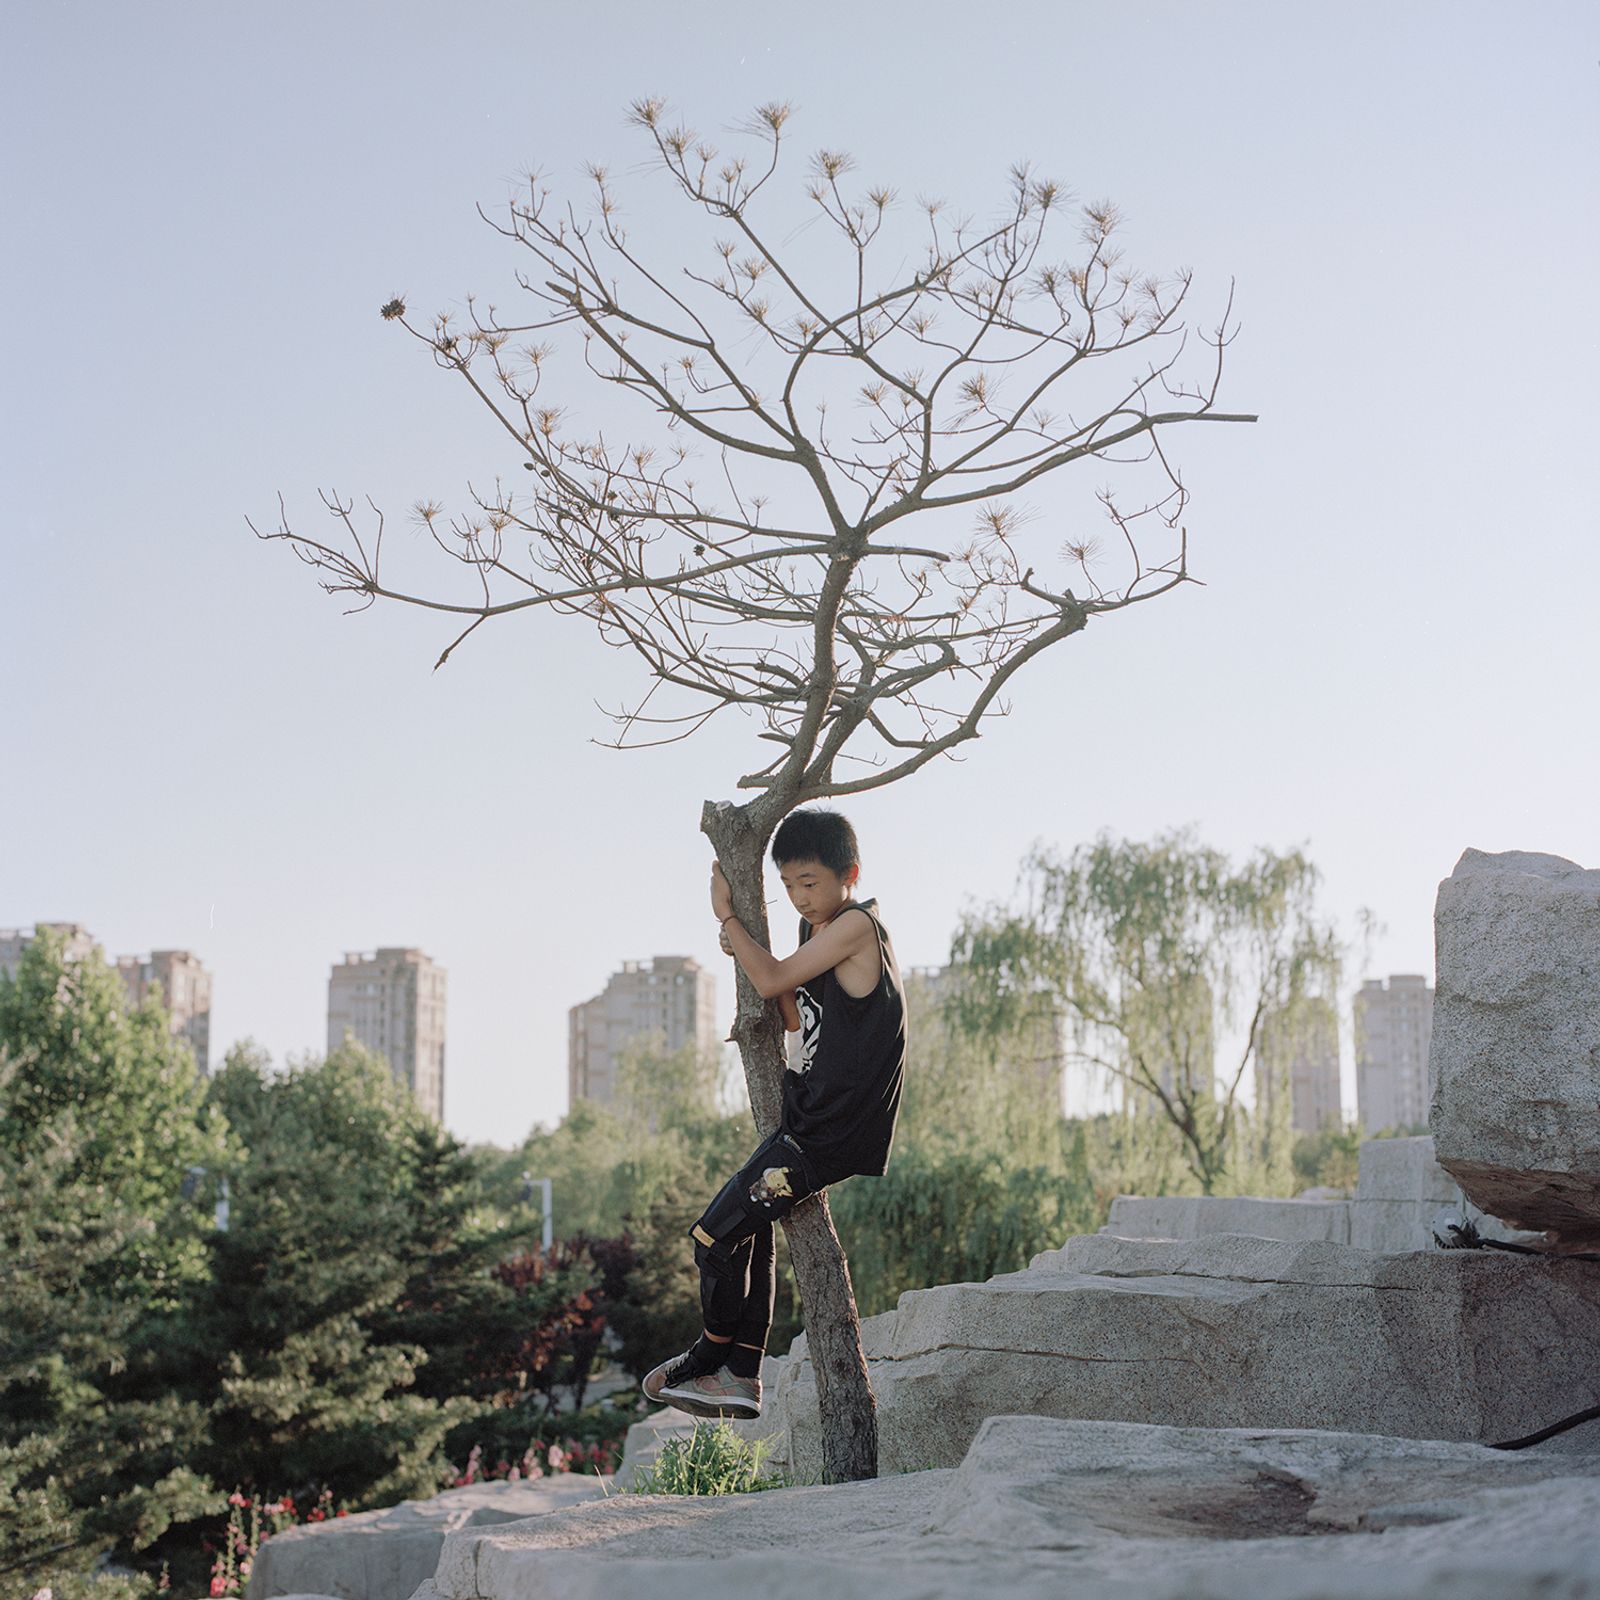 © Pang Hai - Image from the The Garden's crossroads photography project